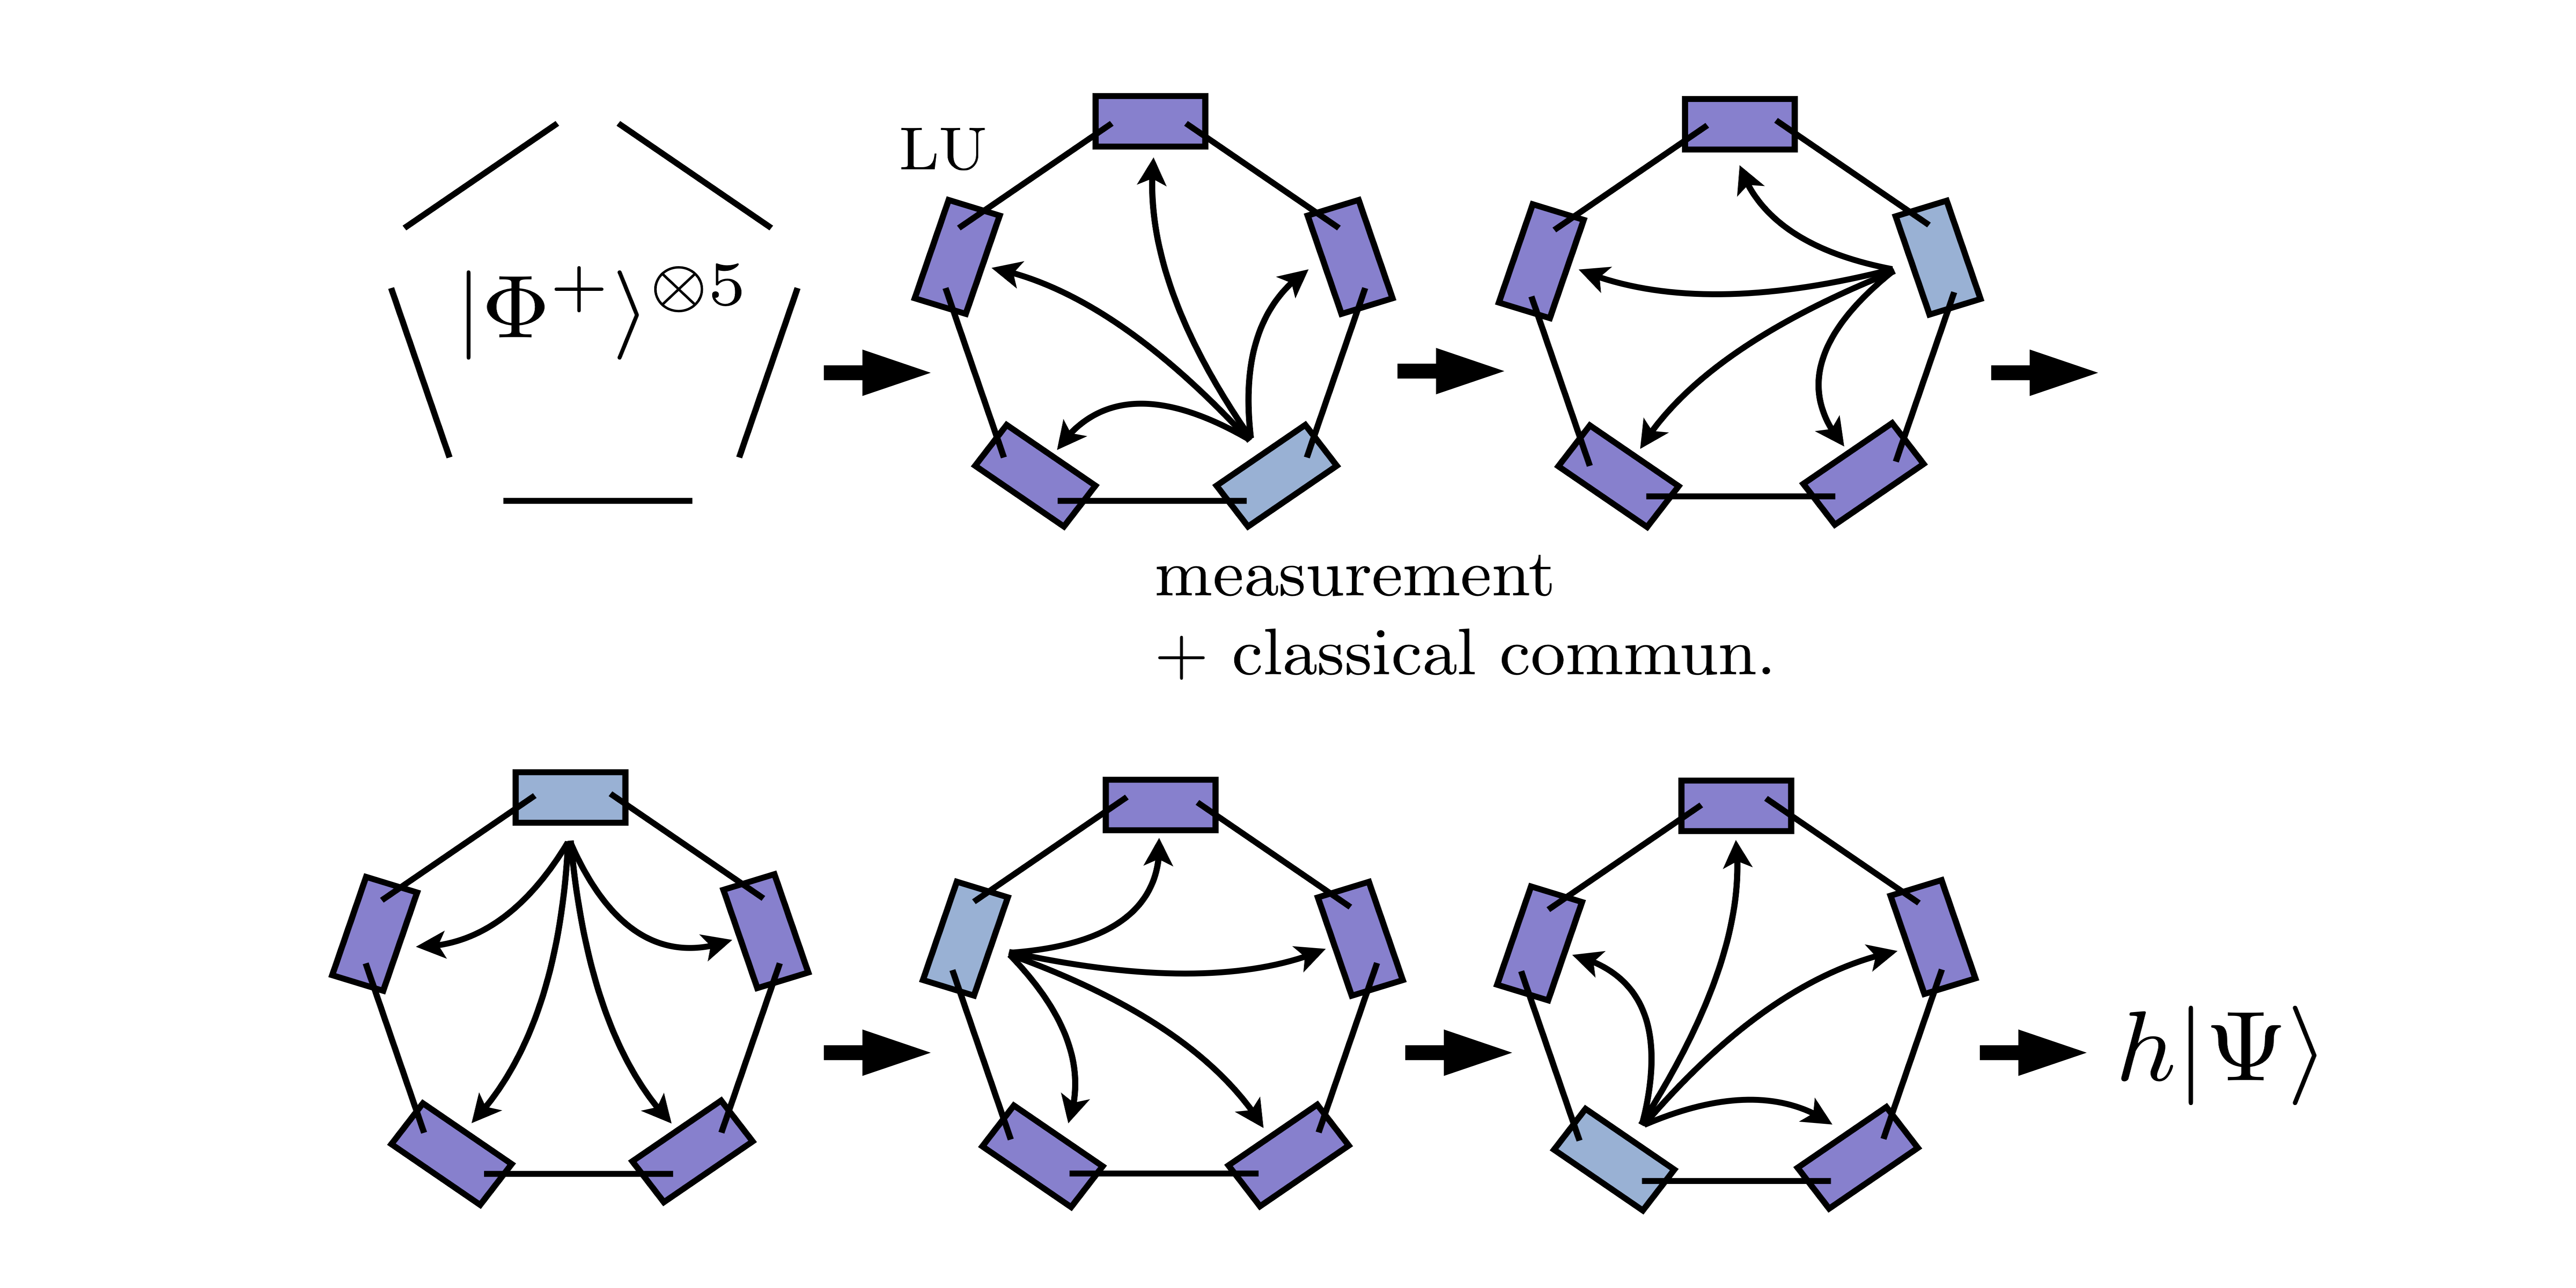 Transformations in quantum networks via local operations assisted by finitely many rounds of classical communication